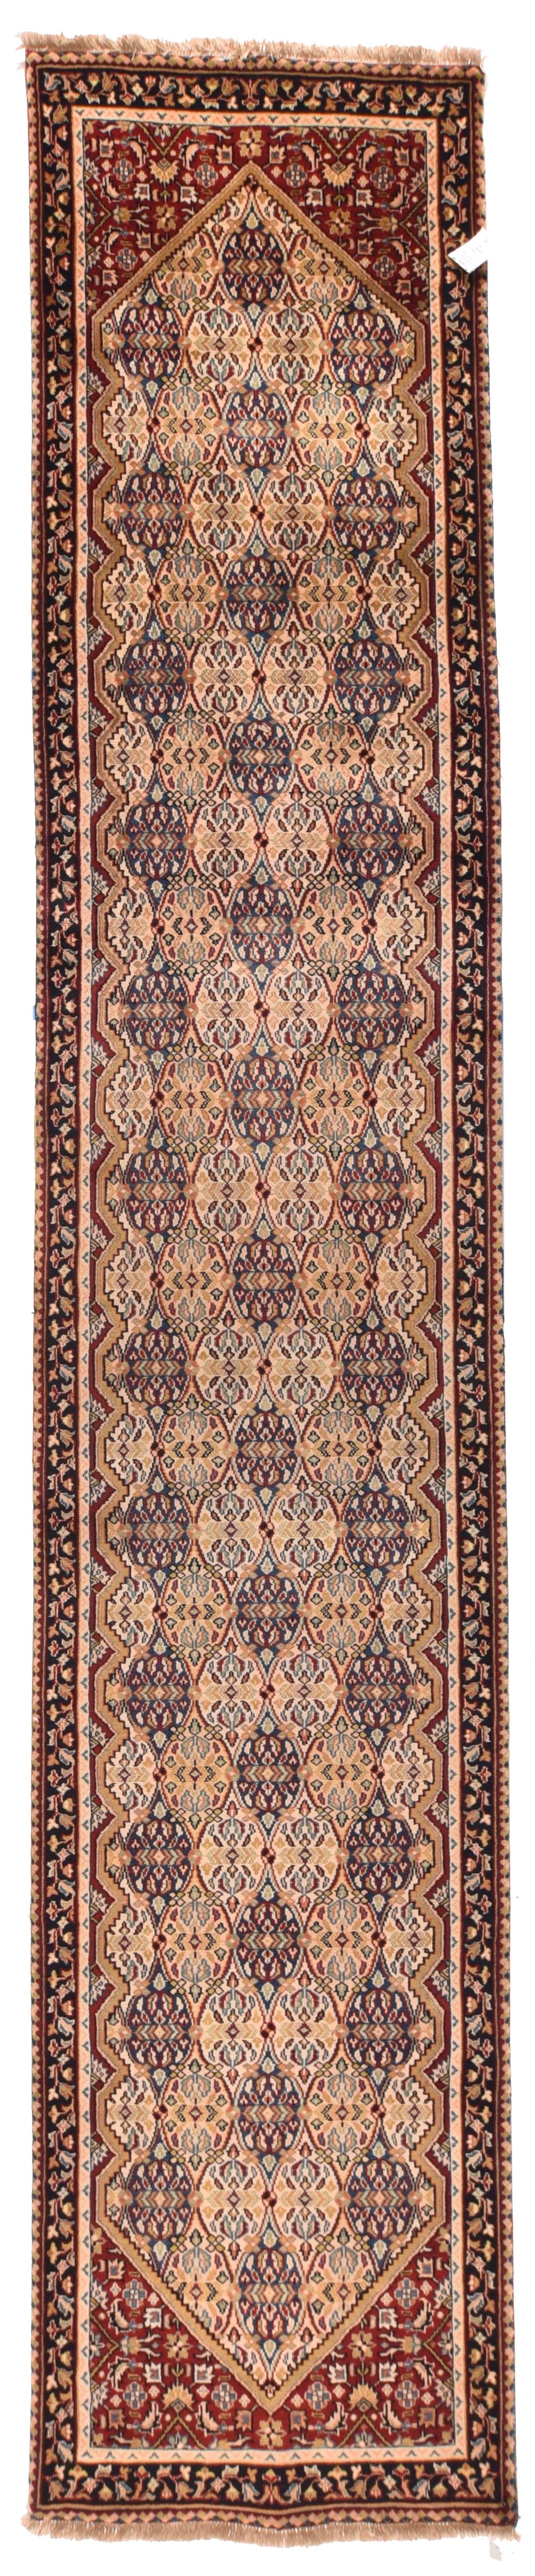 noble antiques rugs